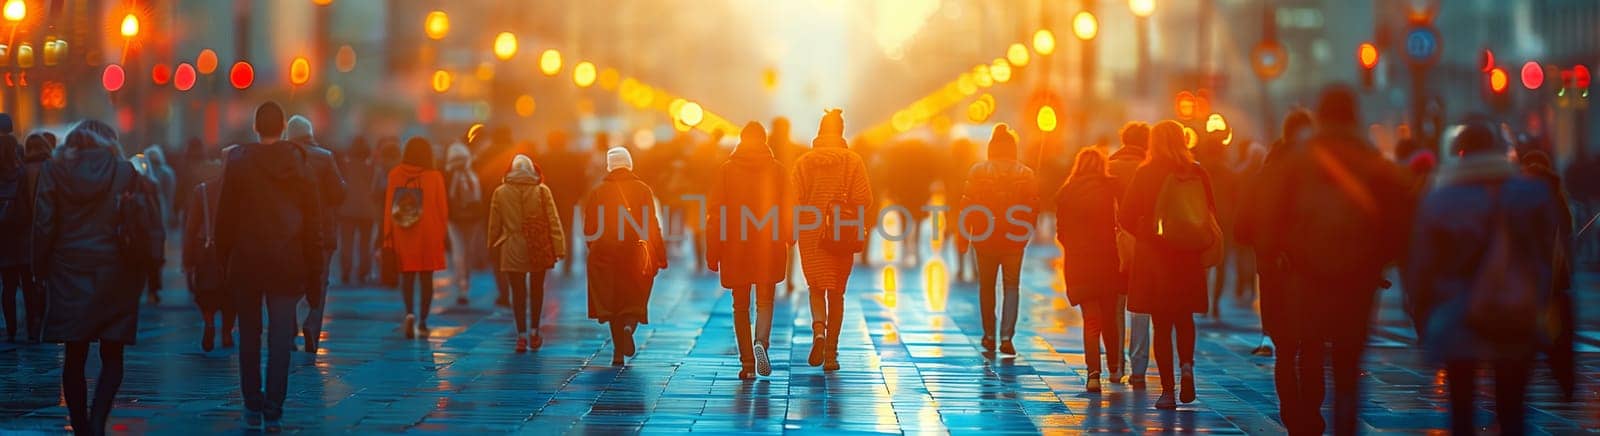 Blurry image captures a crowd walking under electric blue sky by richwolf